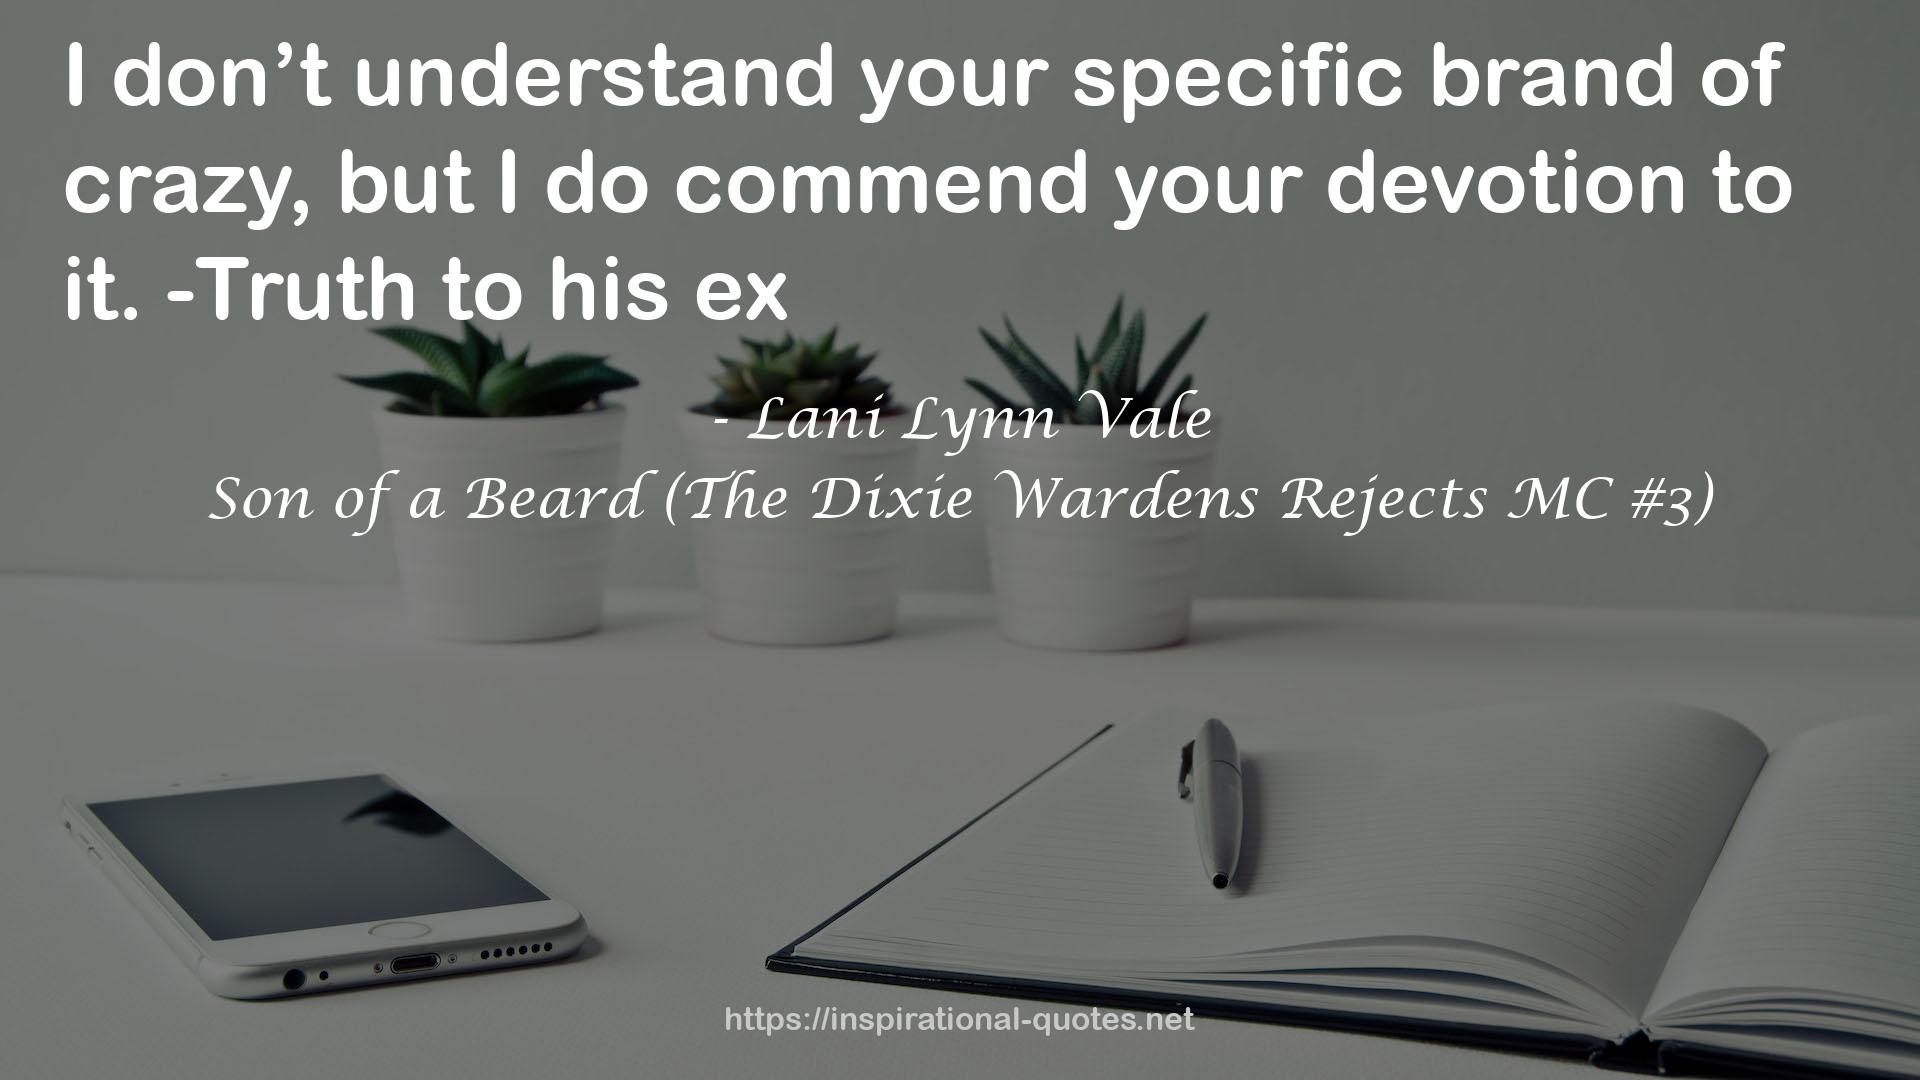 Son of a Beard (The Dixie Wardens Rejects MC #3) QUOTES